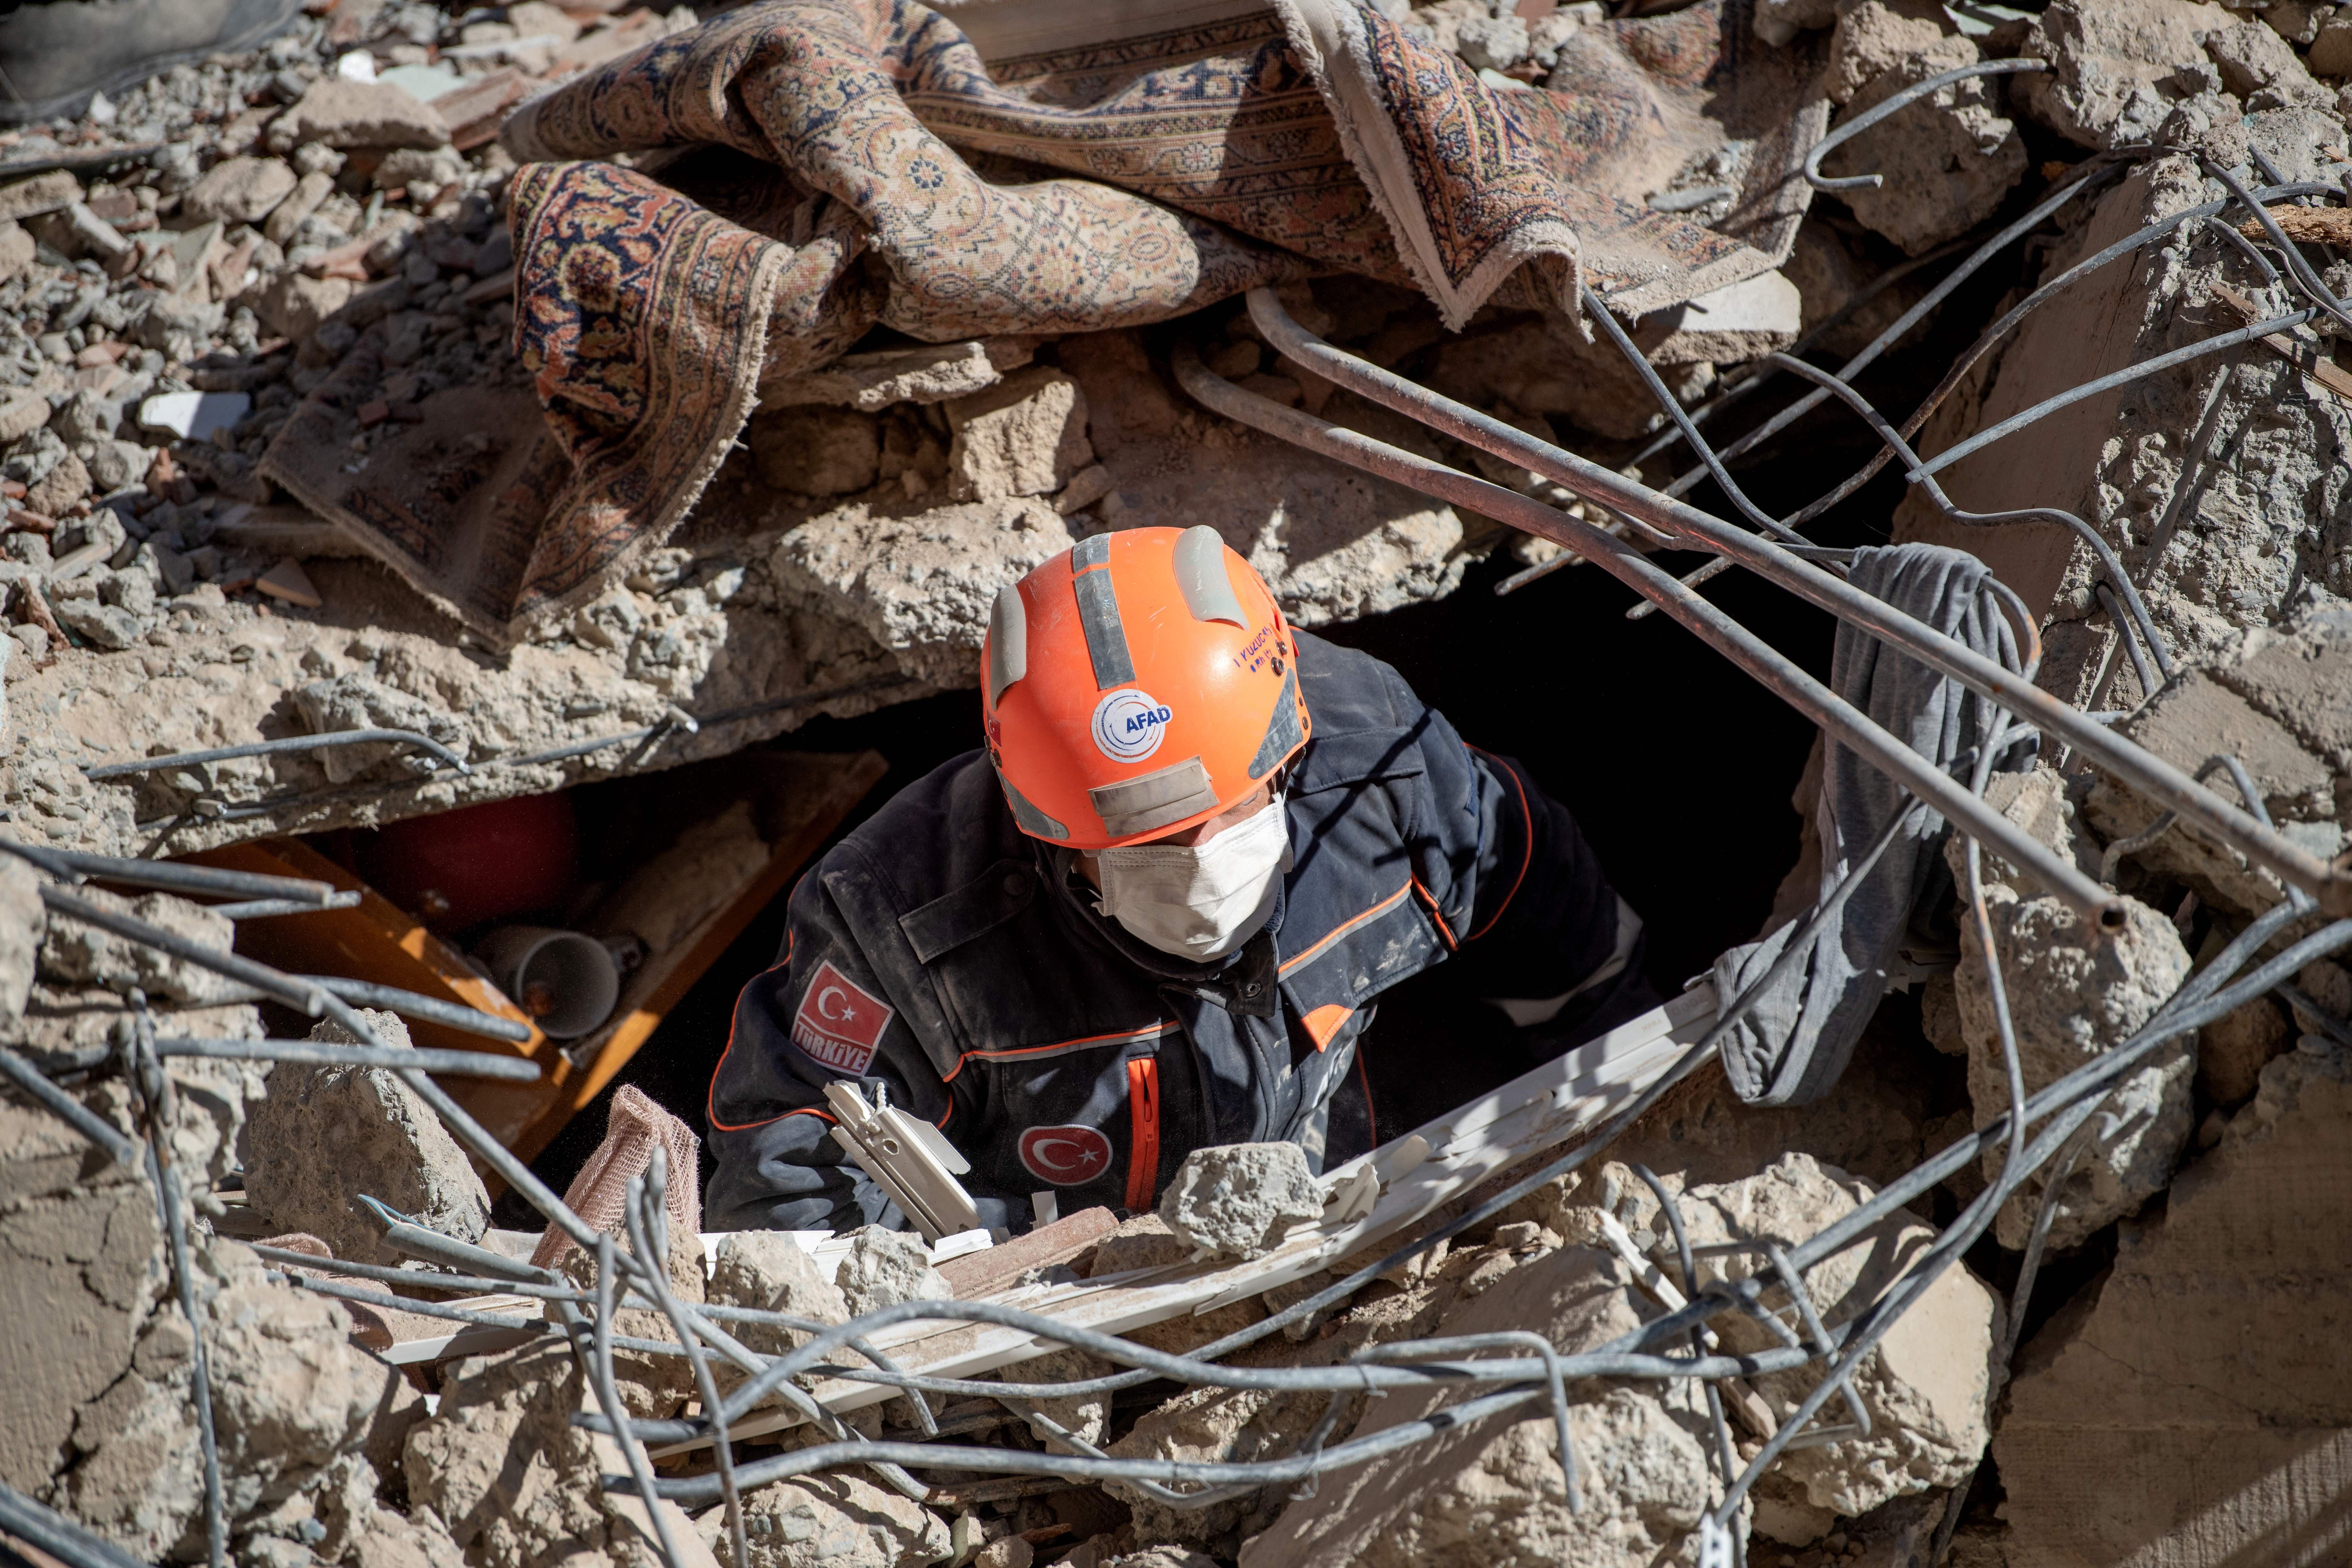 A rescue worker with a mask and hard hat is seen amid the rubble of a collapsed building.